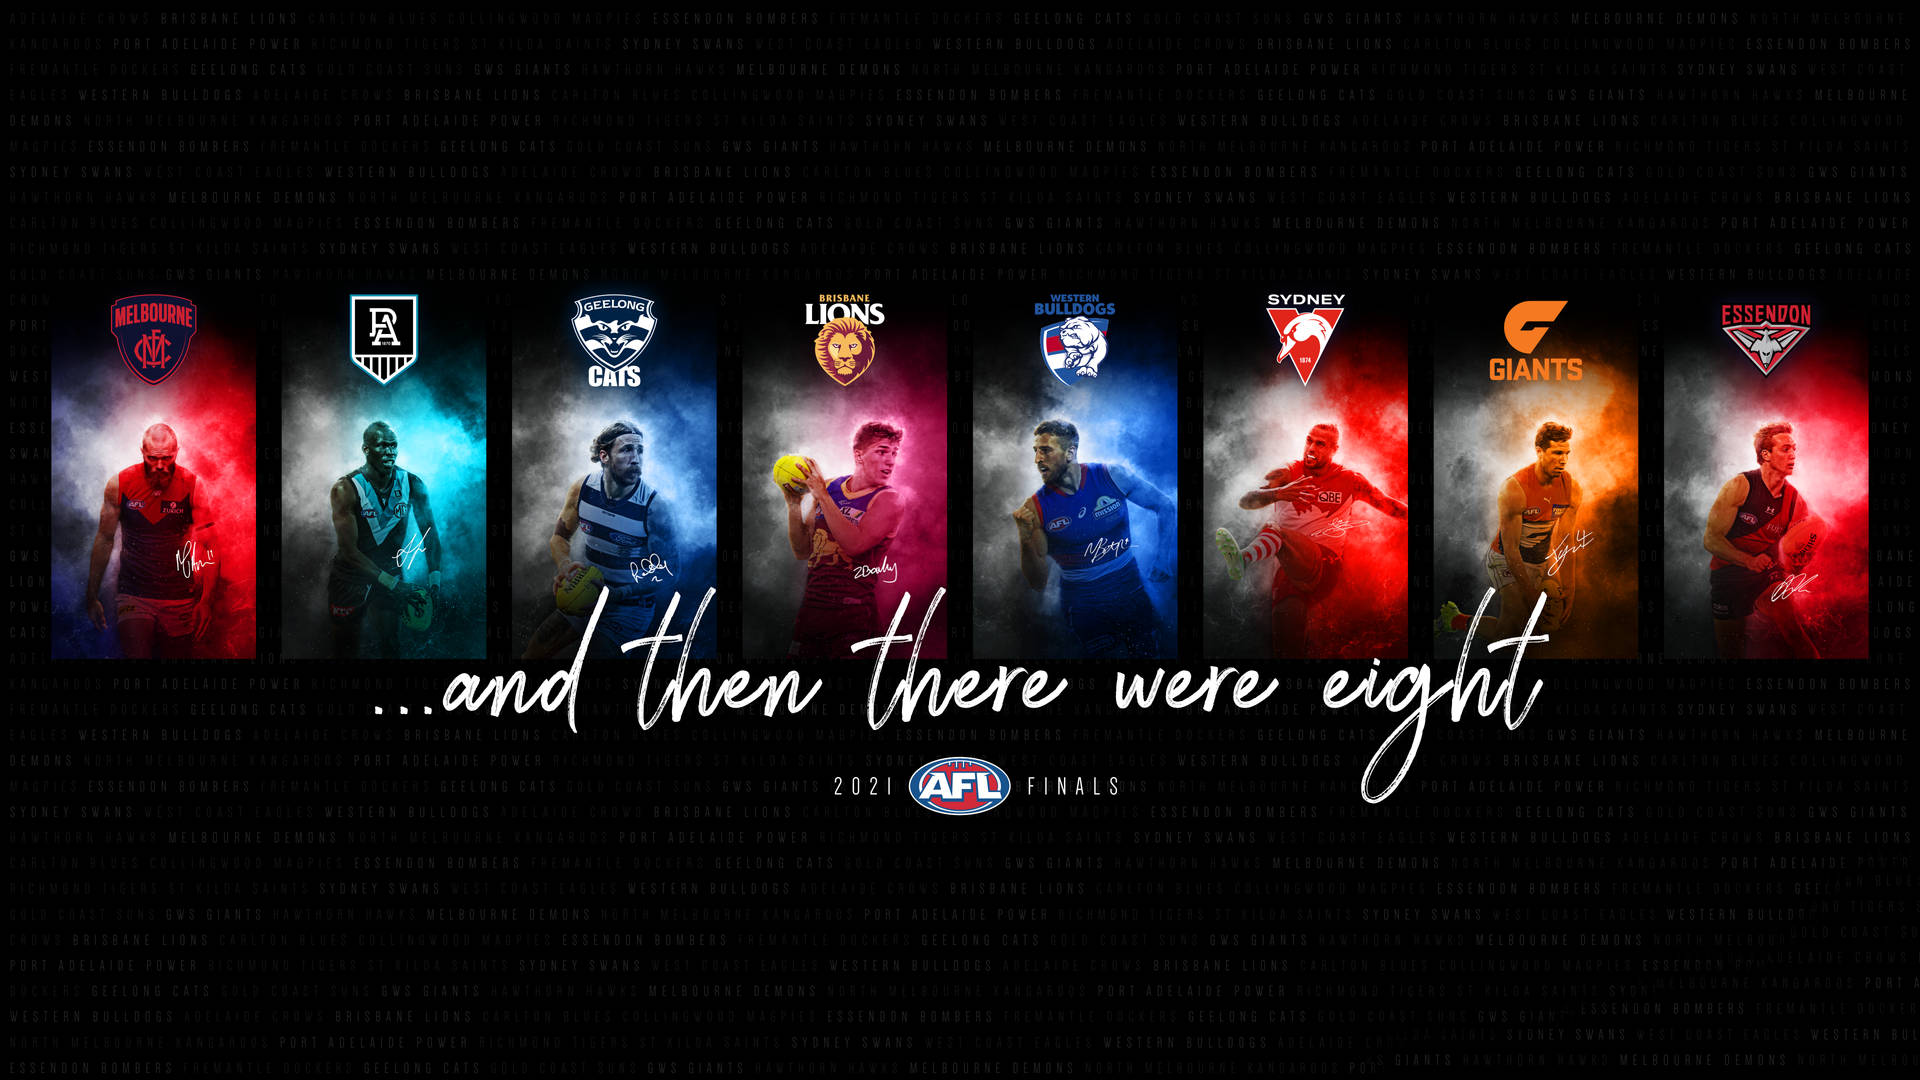 Afl 2021 Finals Eight Teams Background